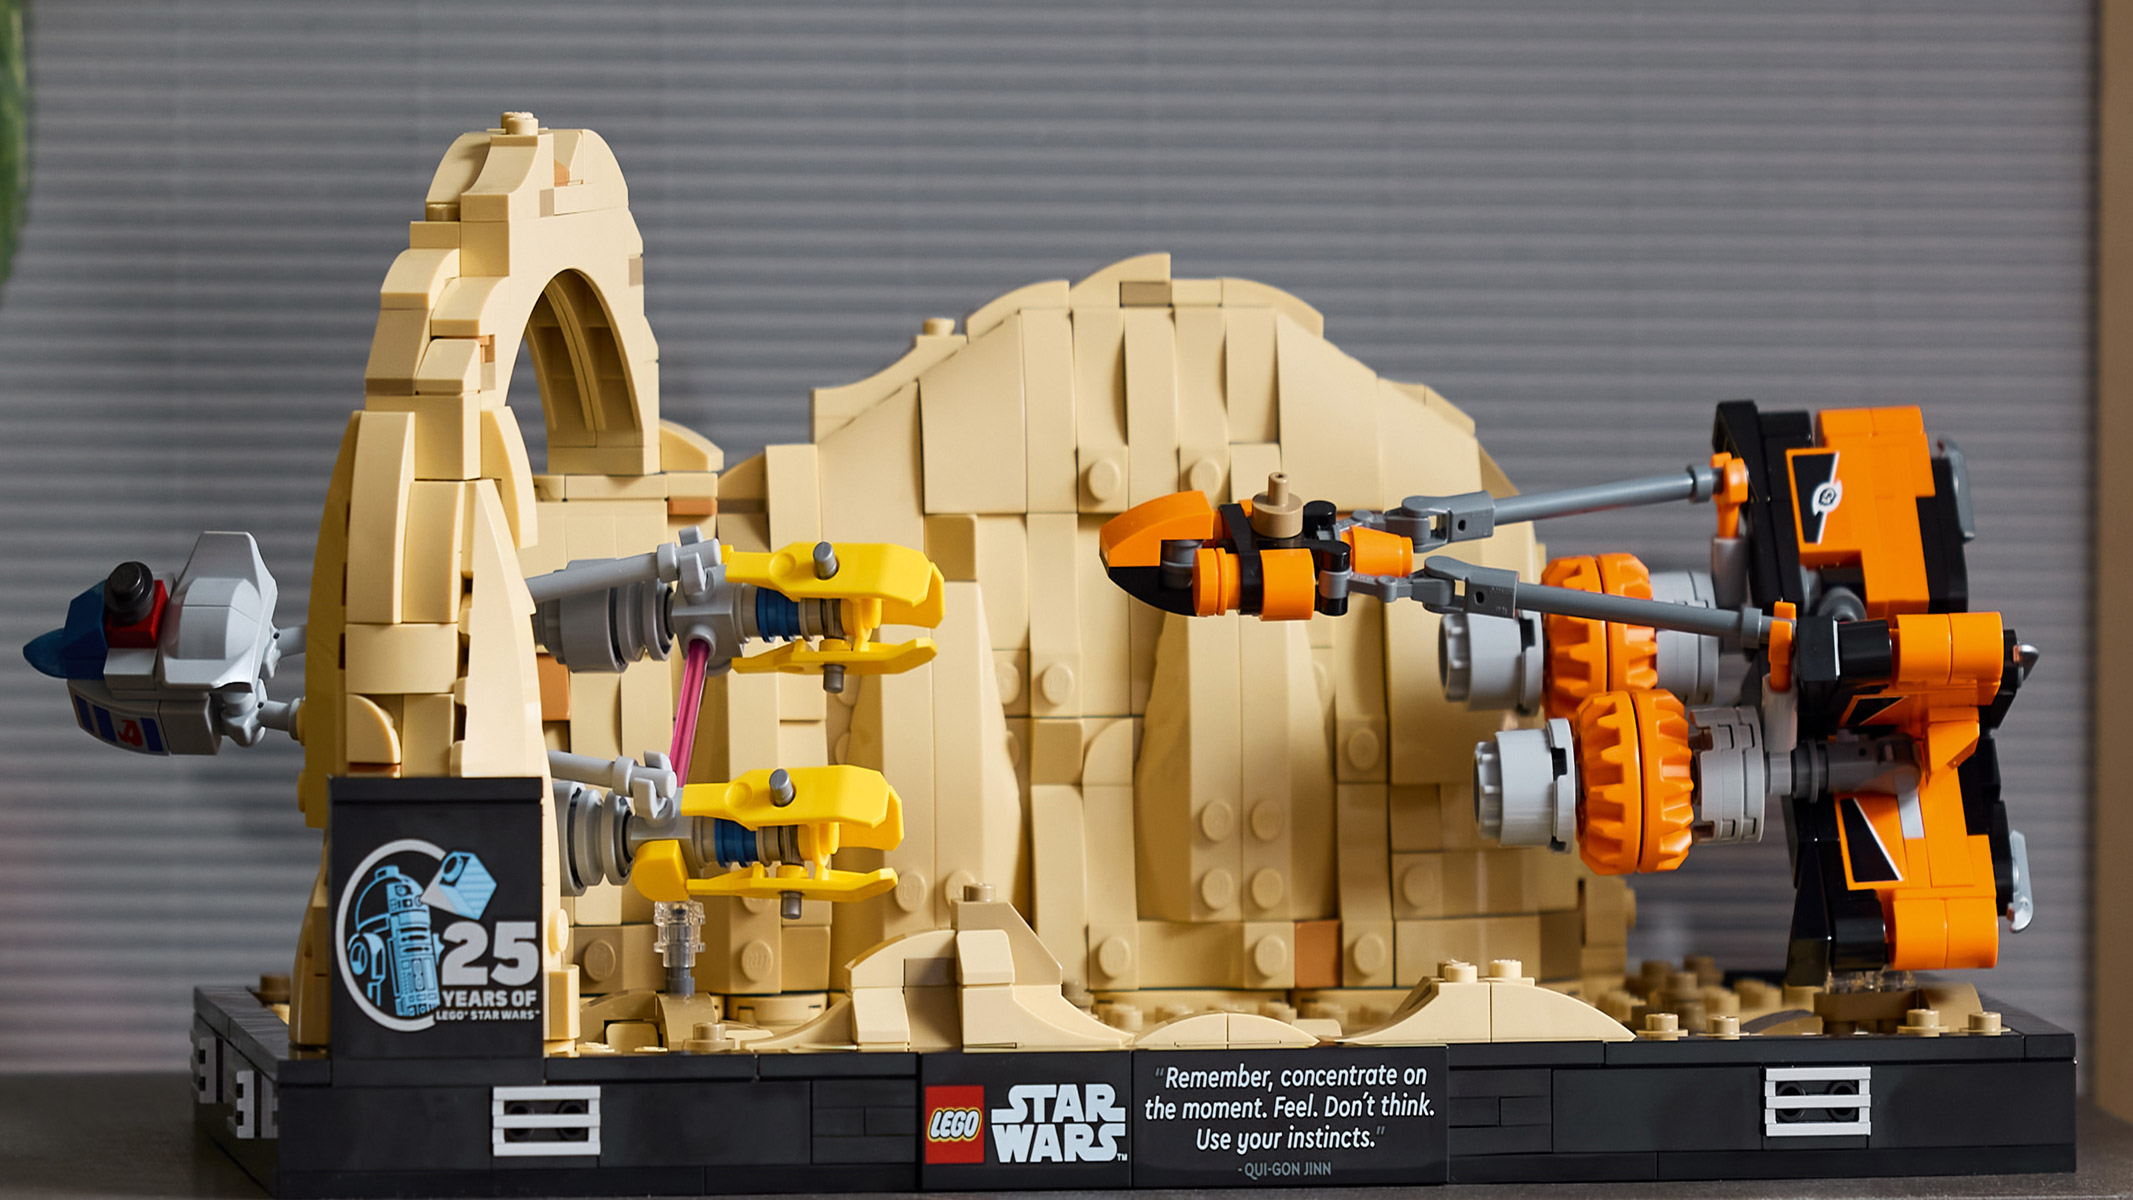 lego releases 7 new star wars sets ahead of 'star wars day' on may 4